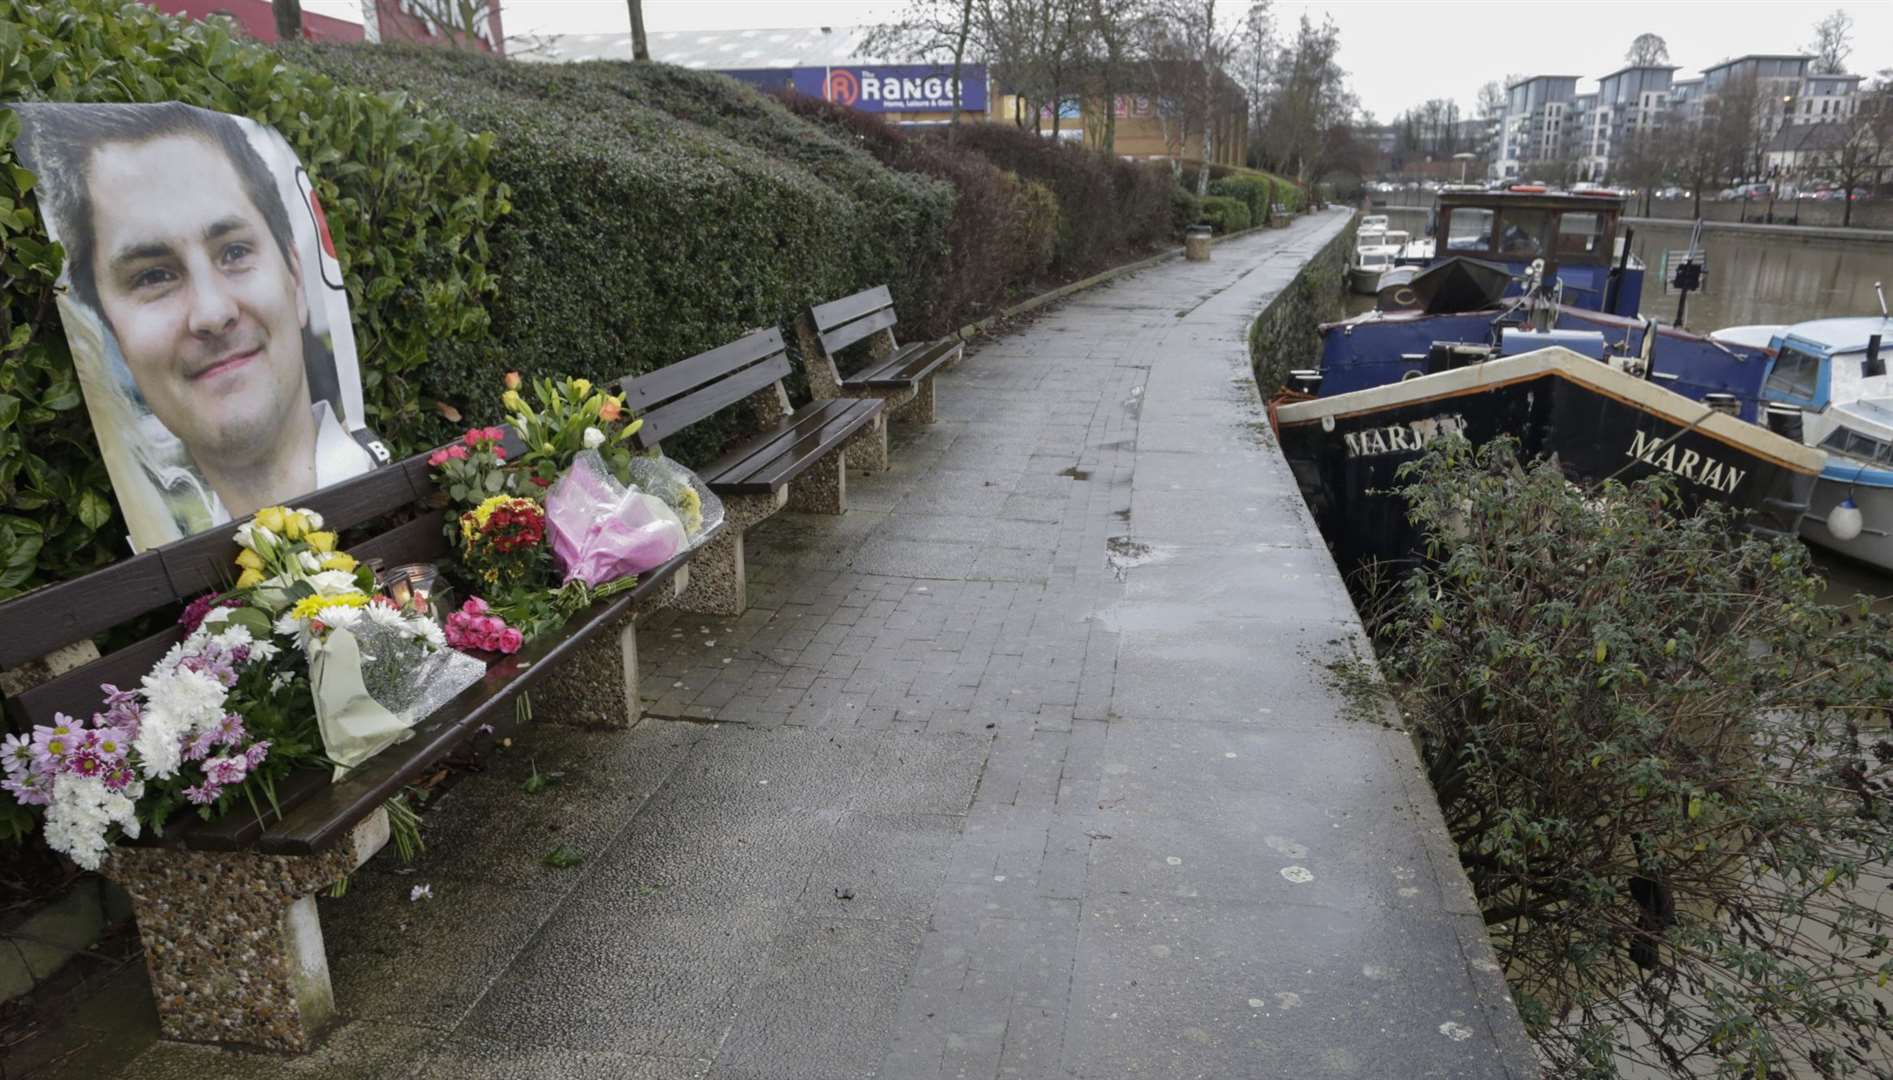 Floral tributes for Pat Lamb are placed on a bench in front of the river in Maidstone